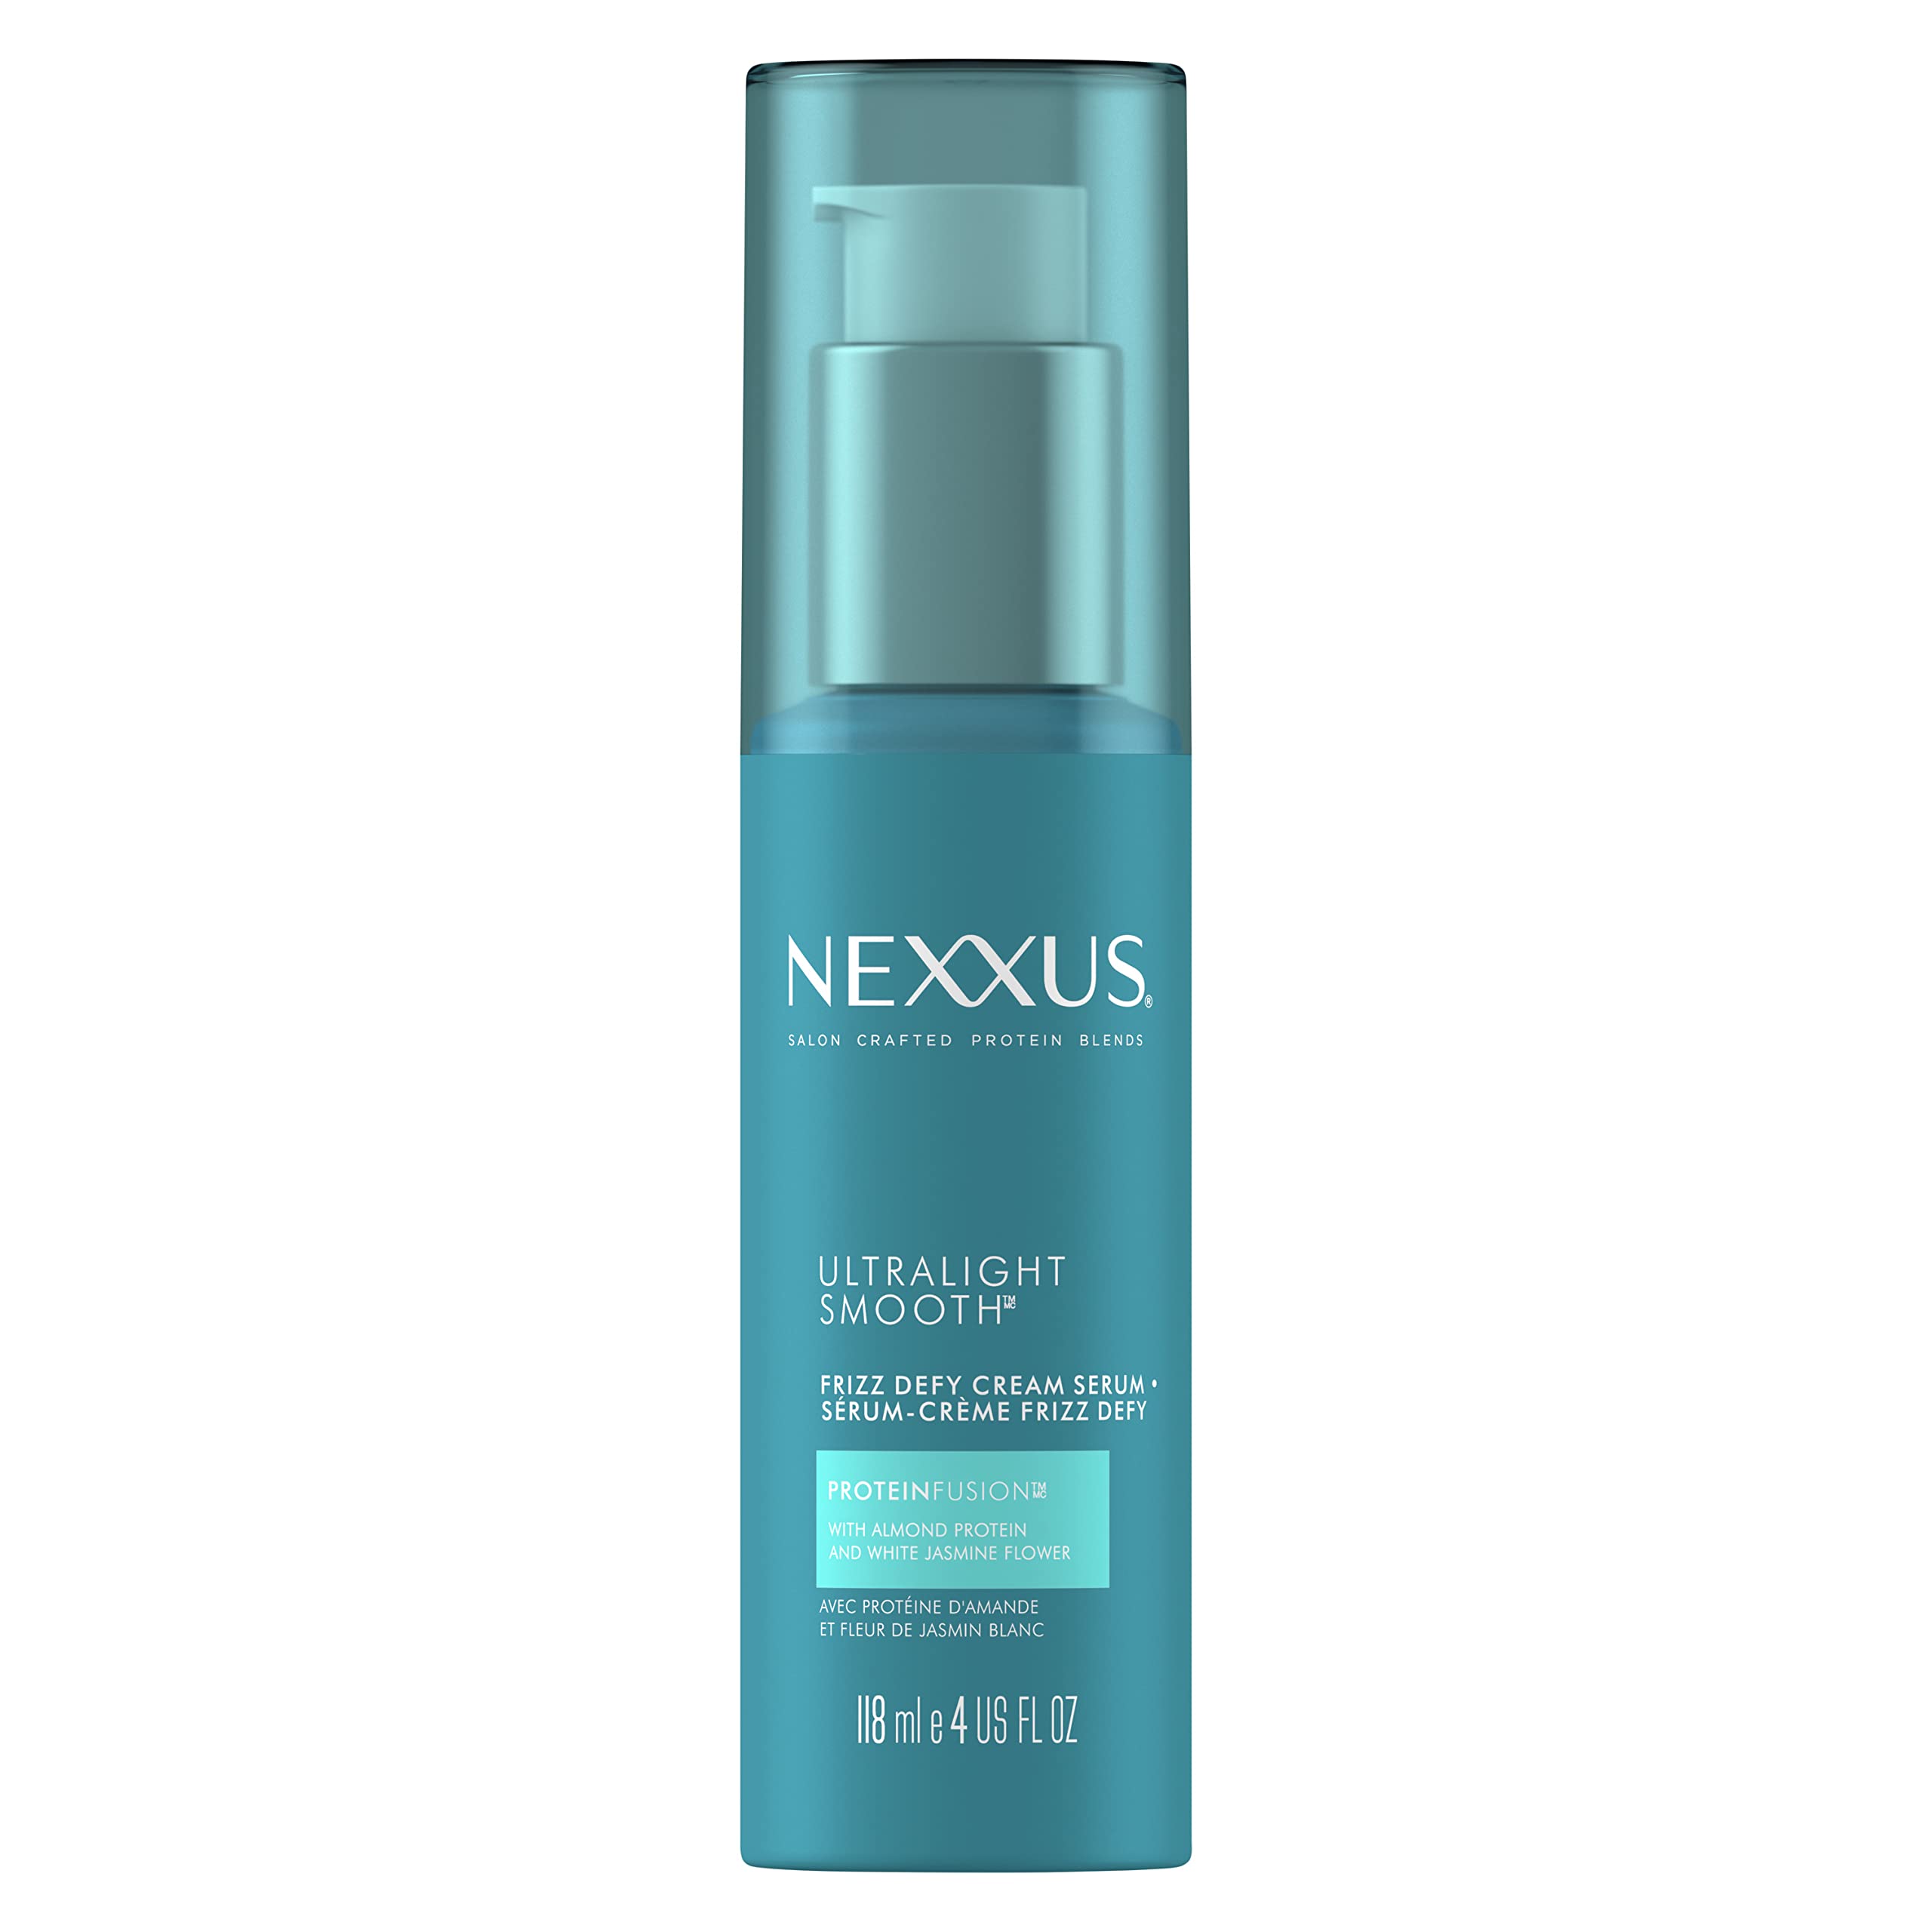 Nexxus Ultralight Smooth Hair Serum for Dry and Frizzy Hair Weightless Smooth Hair Treatment to Block Out Frizz Against Humidity 4 fl oz